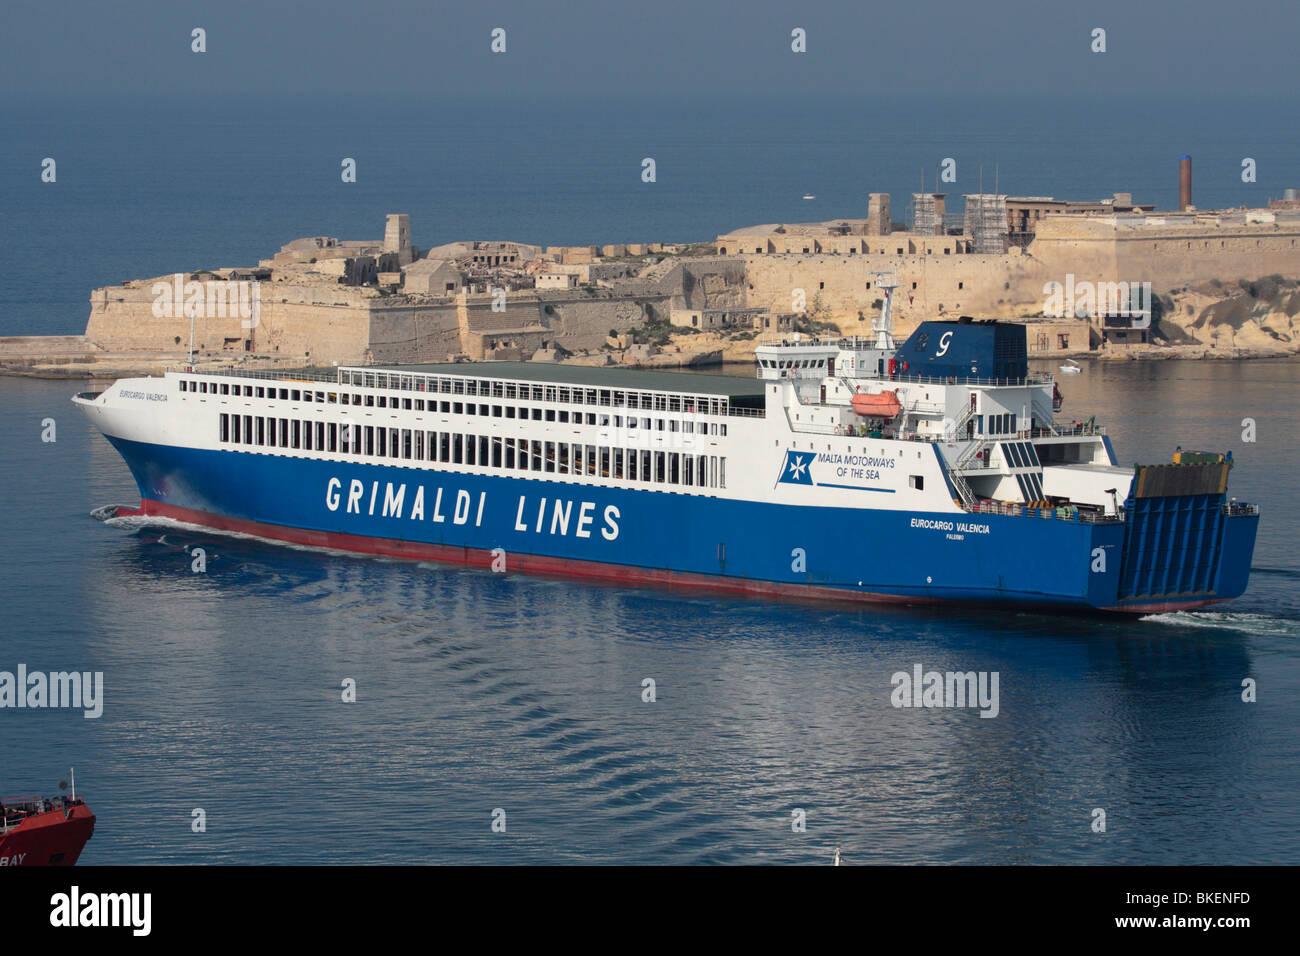 Commercial sea transport. The Grimaldi Lines ro-ro ferry Eurocargo Valencia departing from Malta's Grand Harbour, with Fort Ricasoli in the background Stock Photo